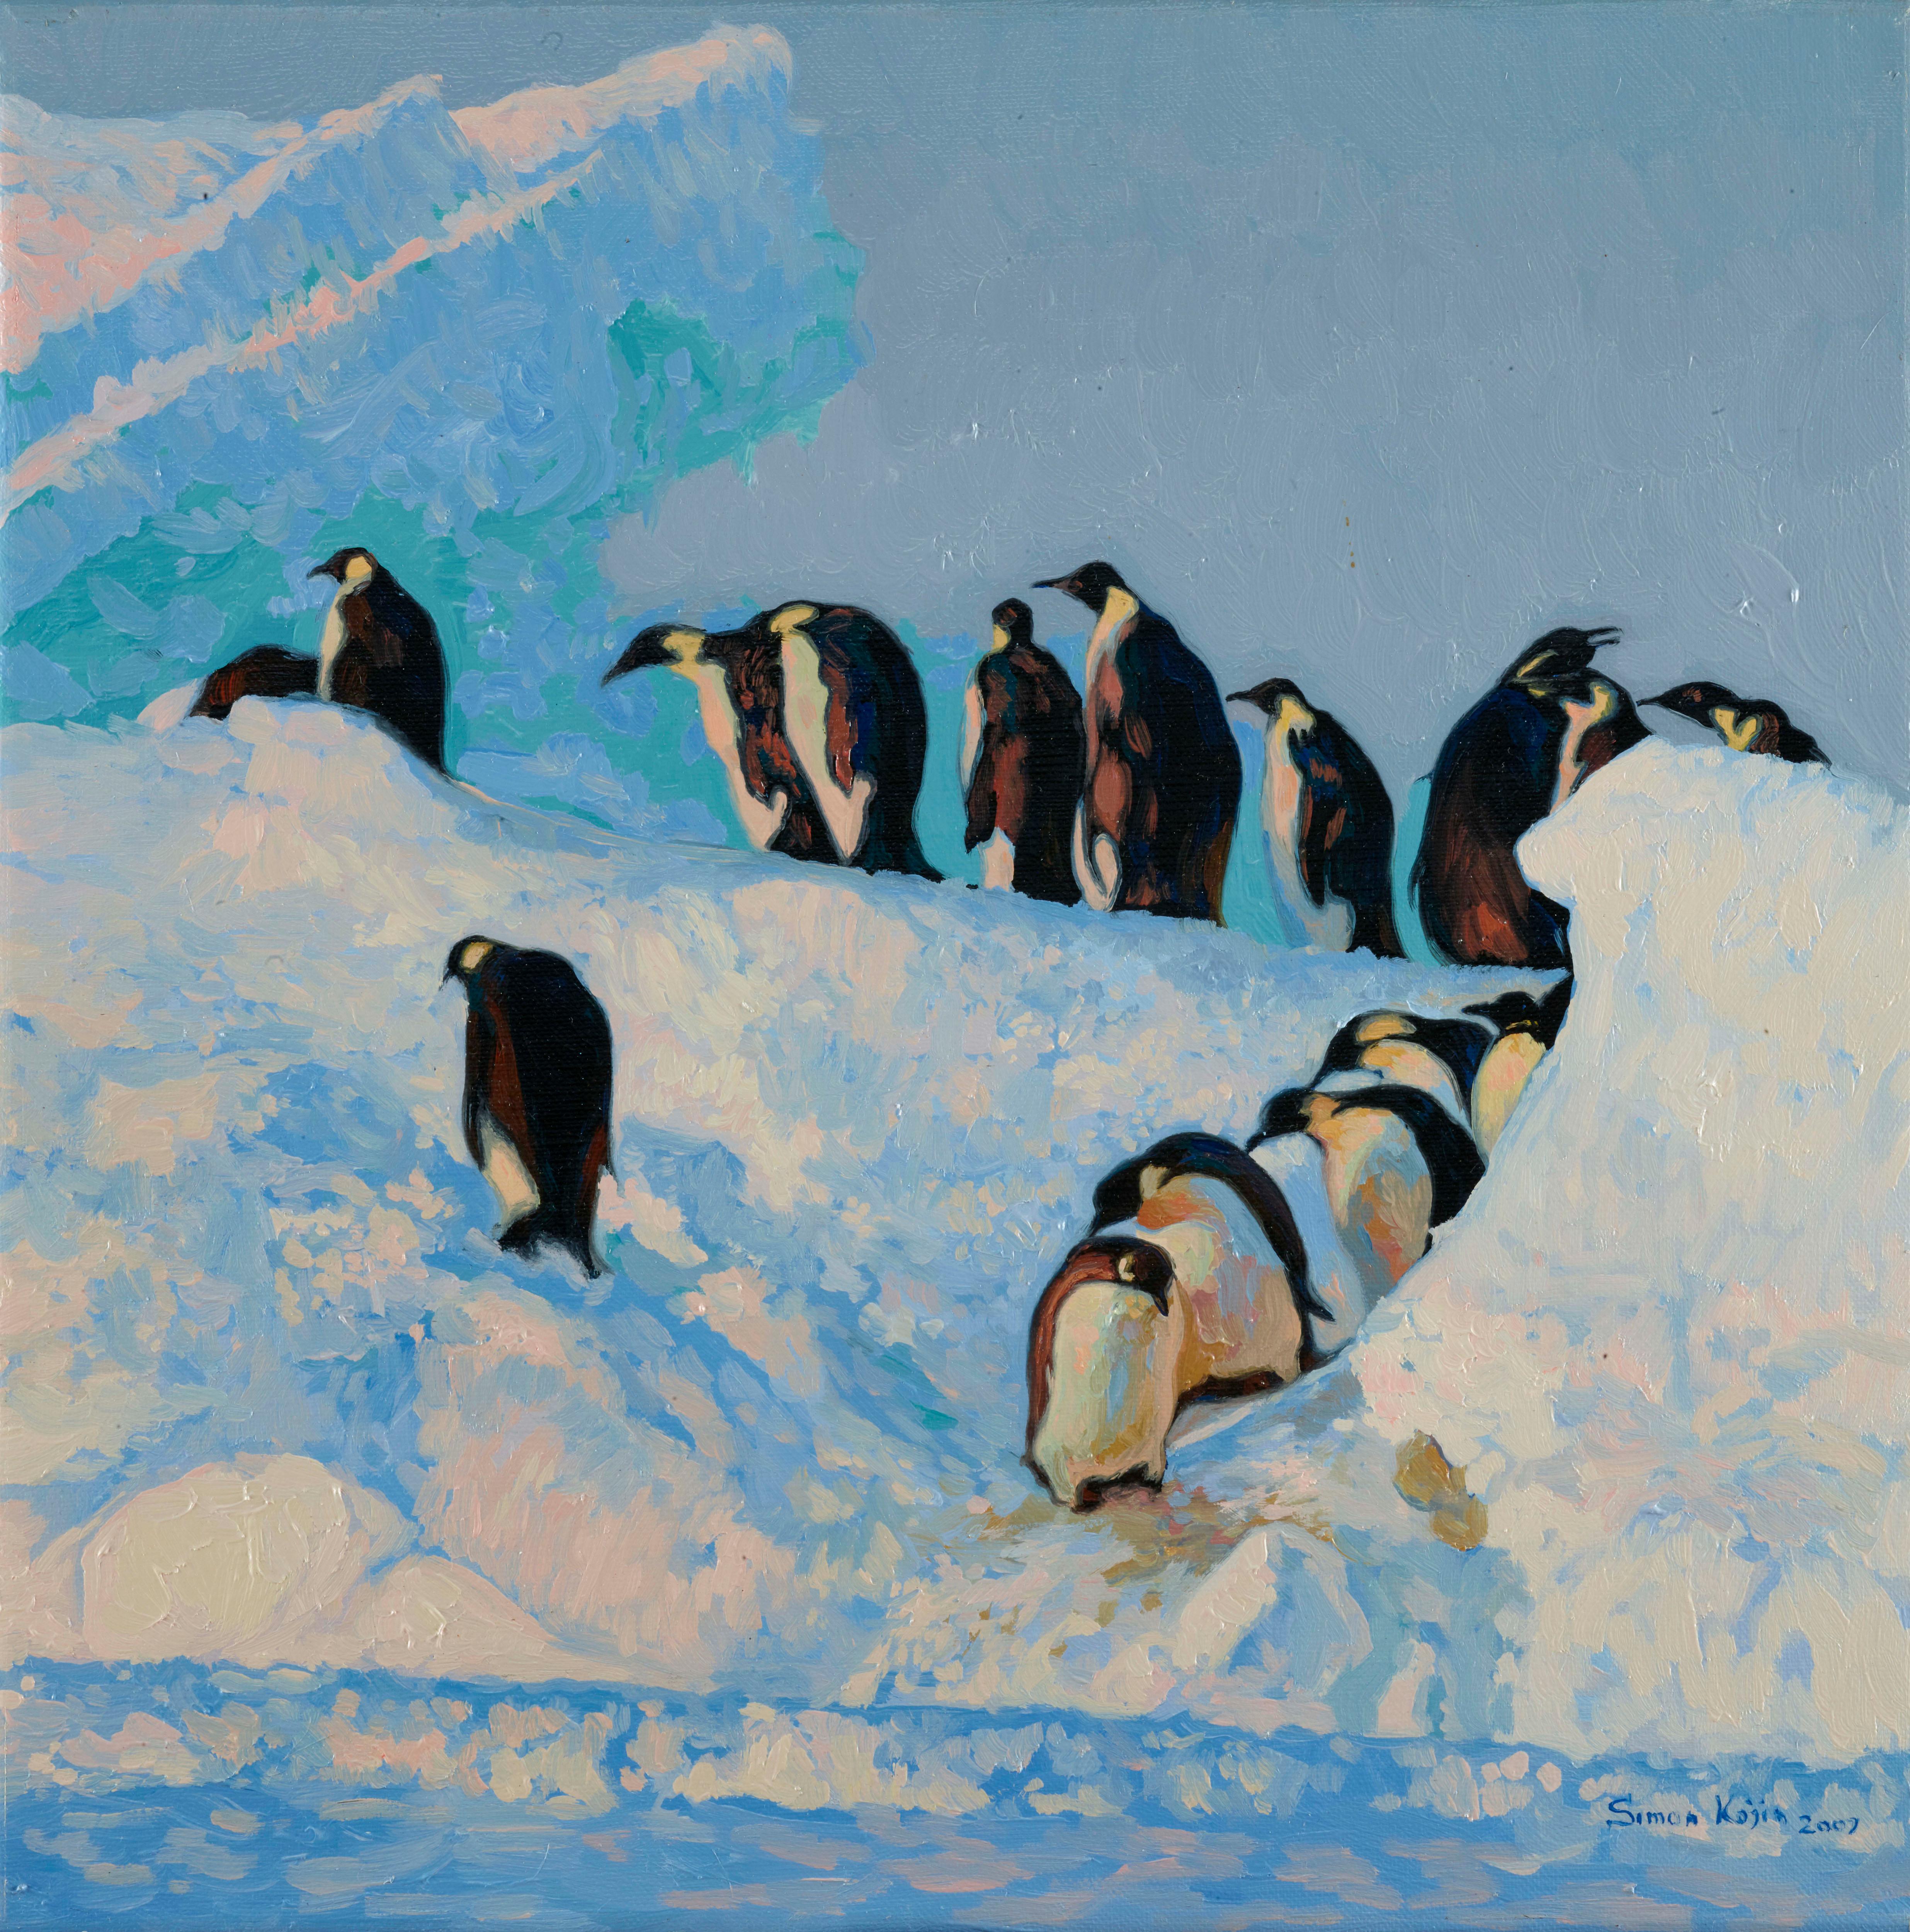 Penguins went hunting, they are lit by the sun, located among the Antarctic ice. This is an eternal struggle for survival.
Provenance:
2007 - 2016 Private collection.
Exhibition:
2018 The personalexhibition "In search of color." Plyos State